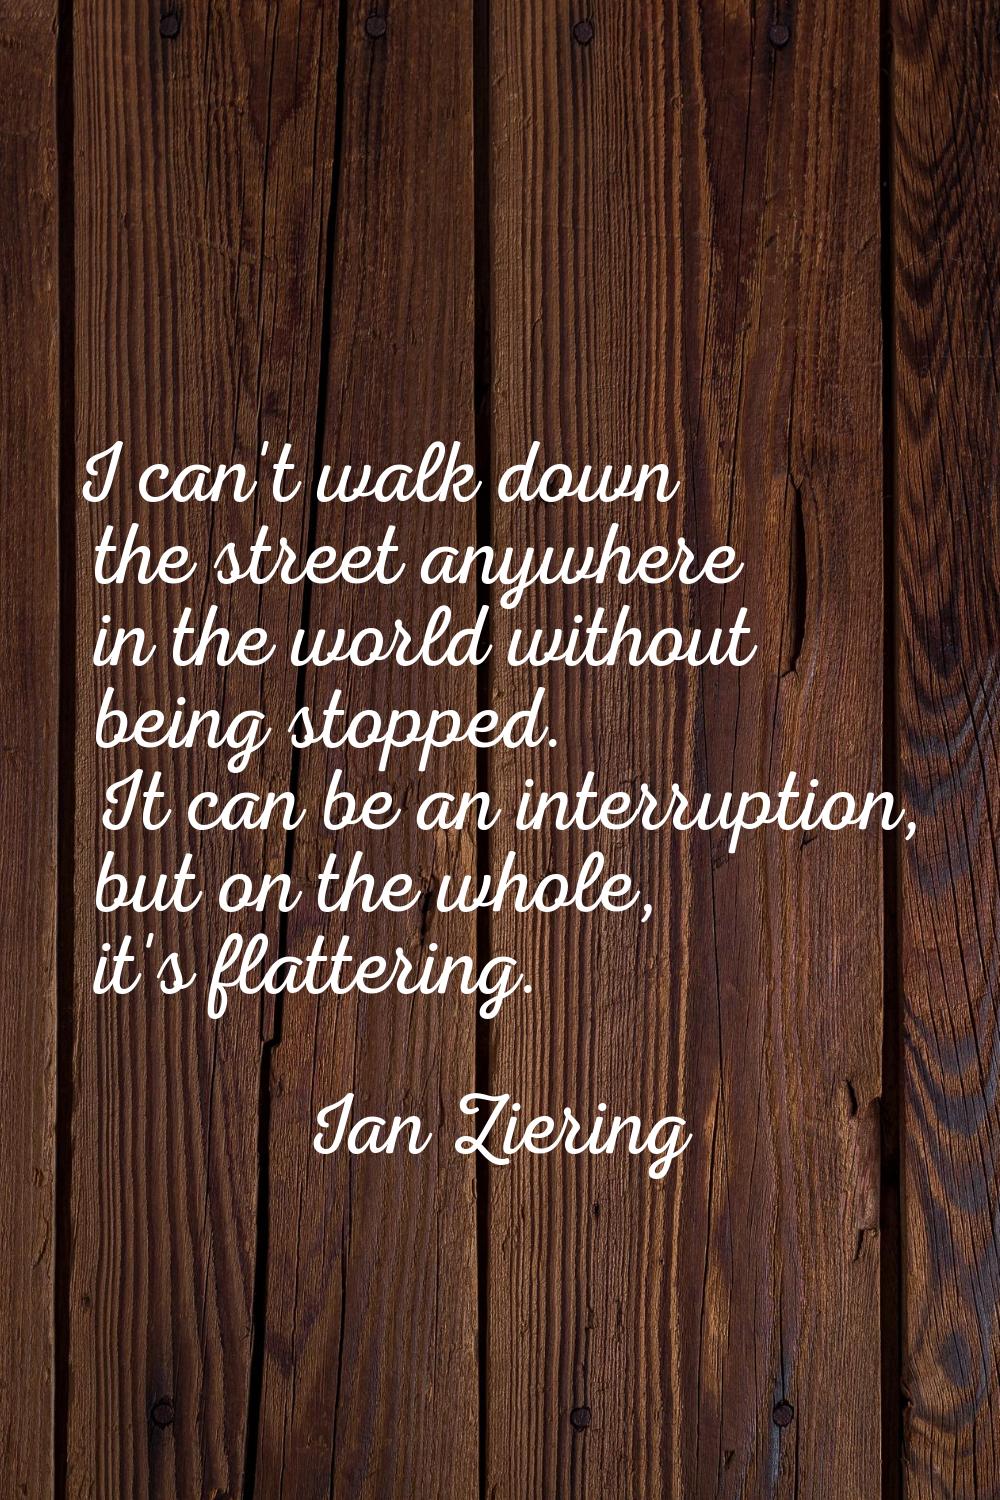 I can't walk down the street anywhere in the world without being stopped. It can be an interruption